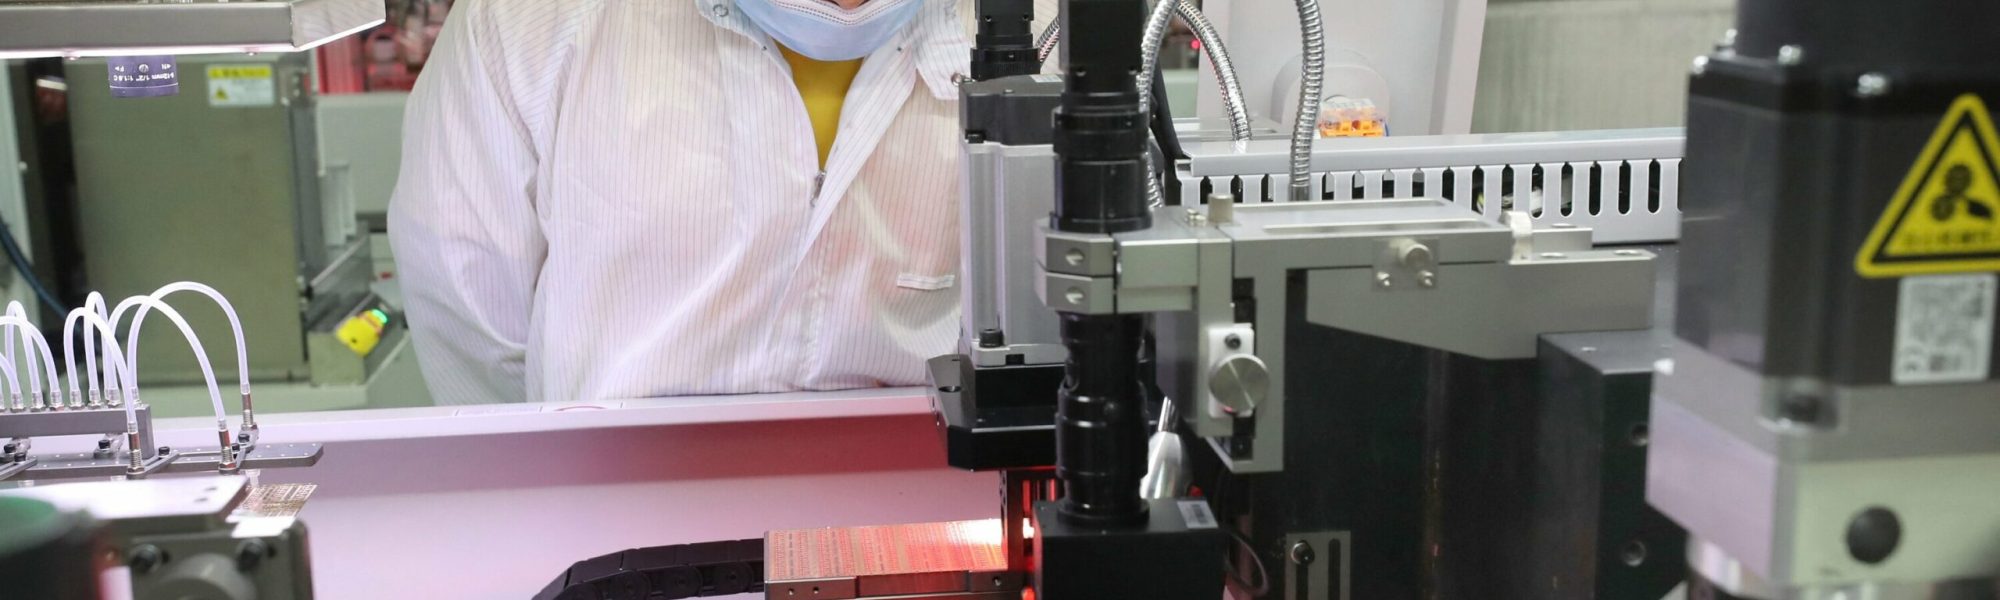 Biden Administration to Clamp Down on China’s Access to Chip Technology